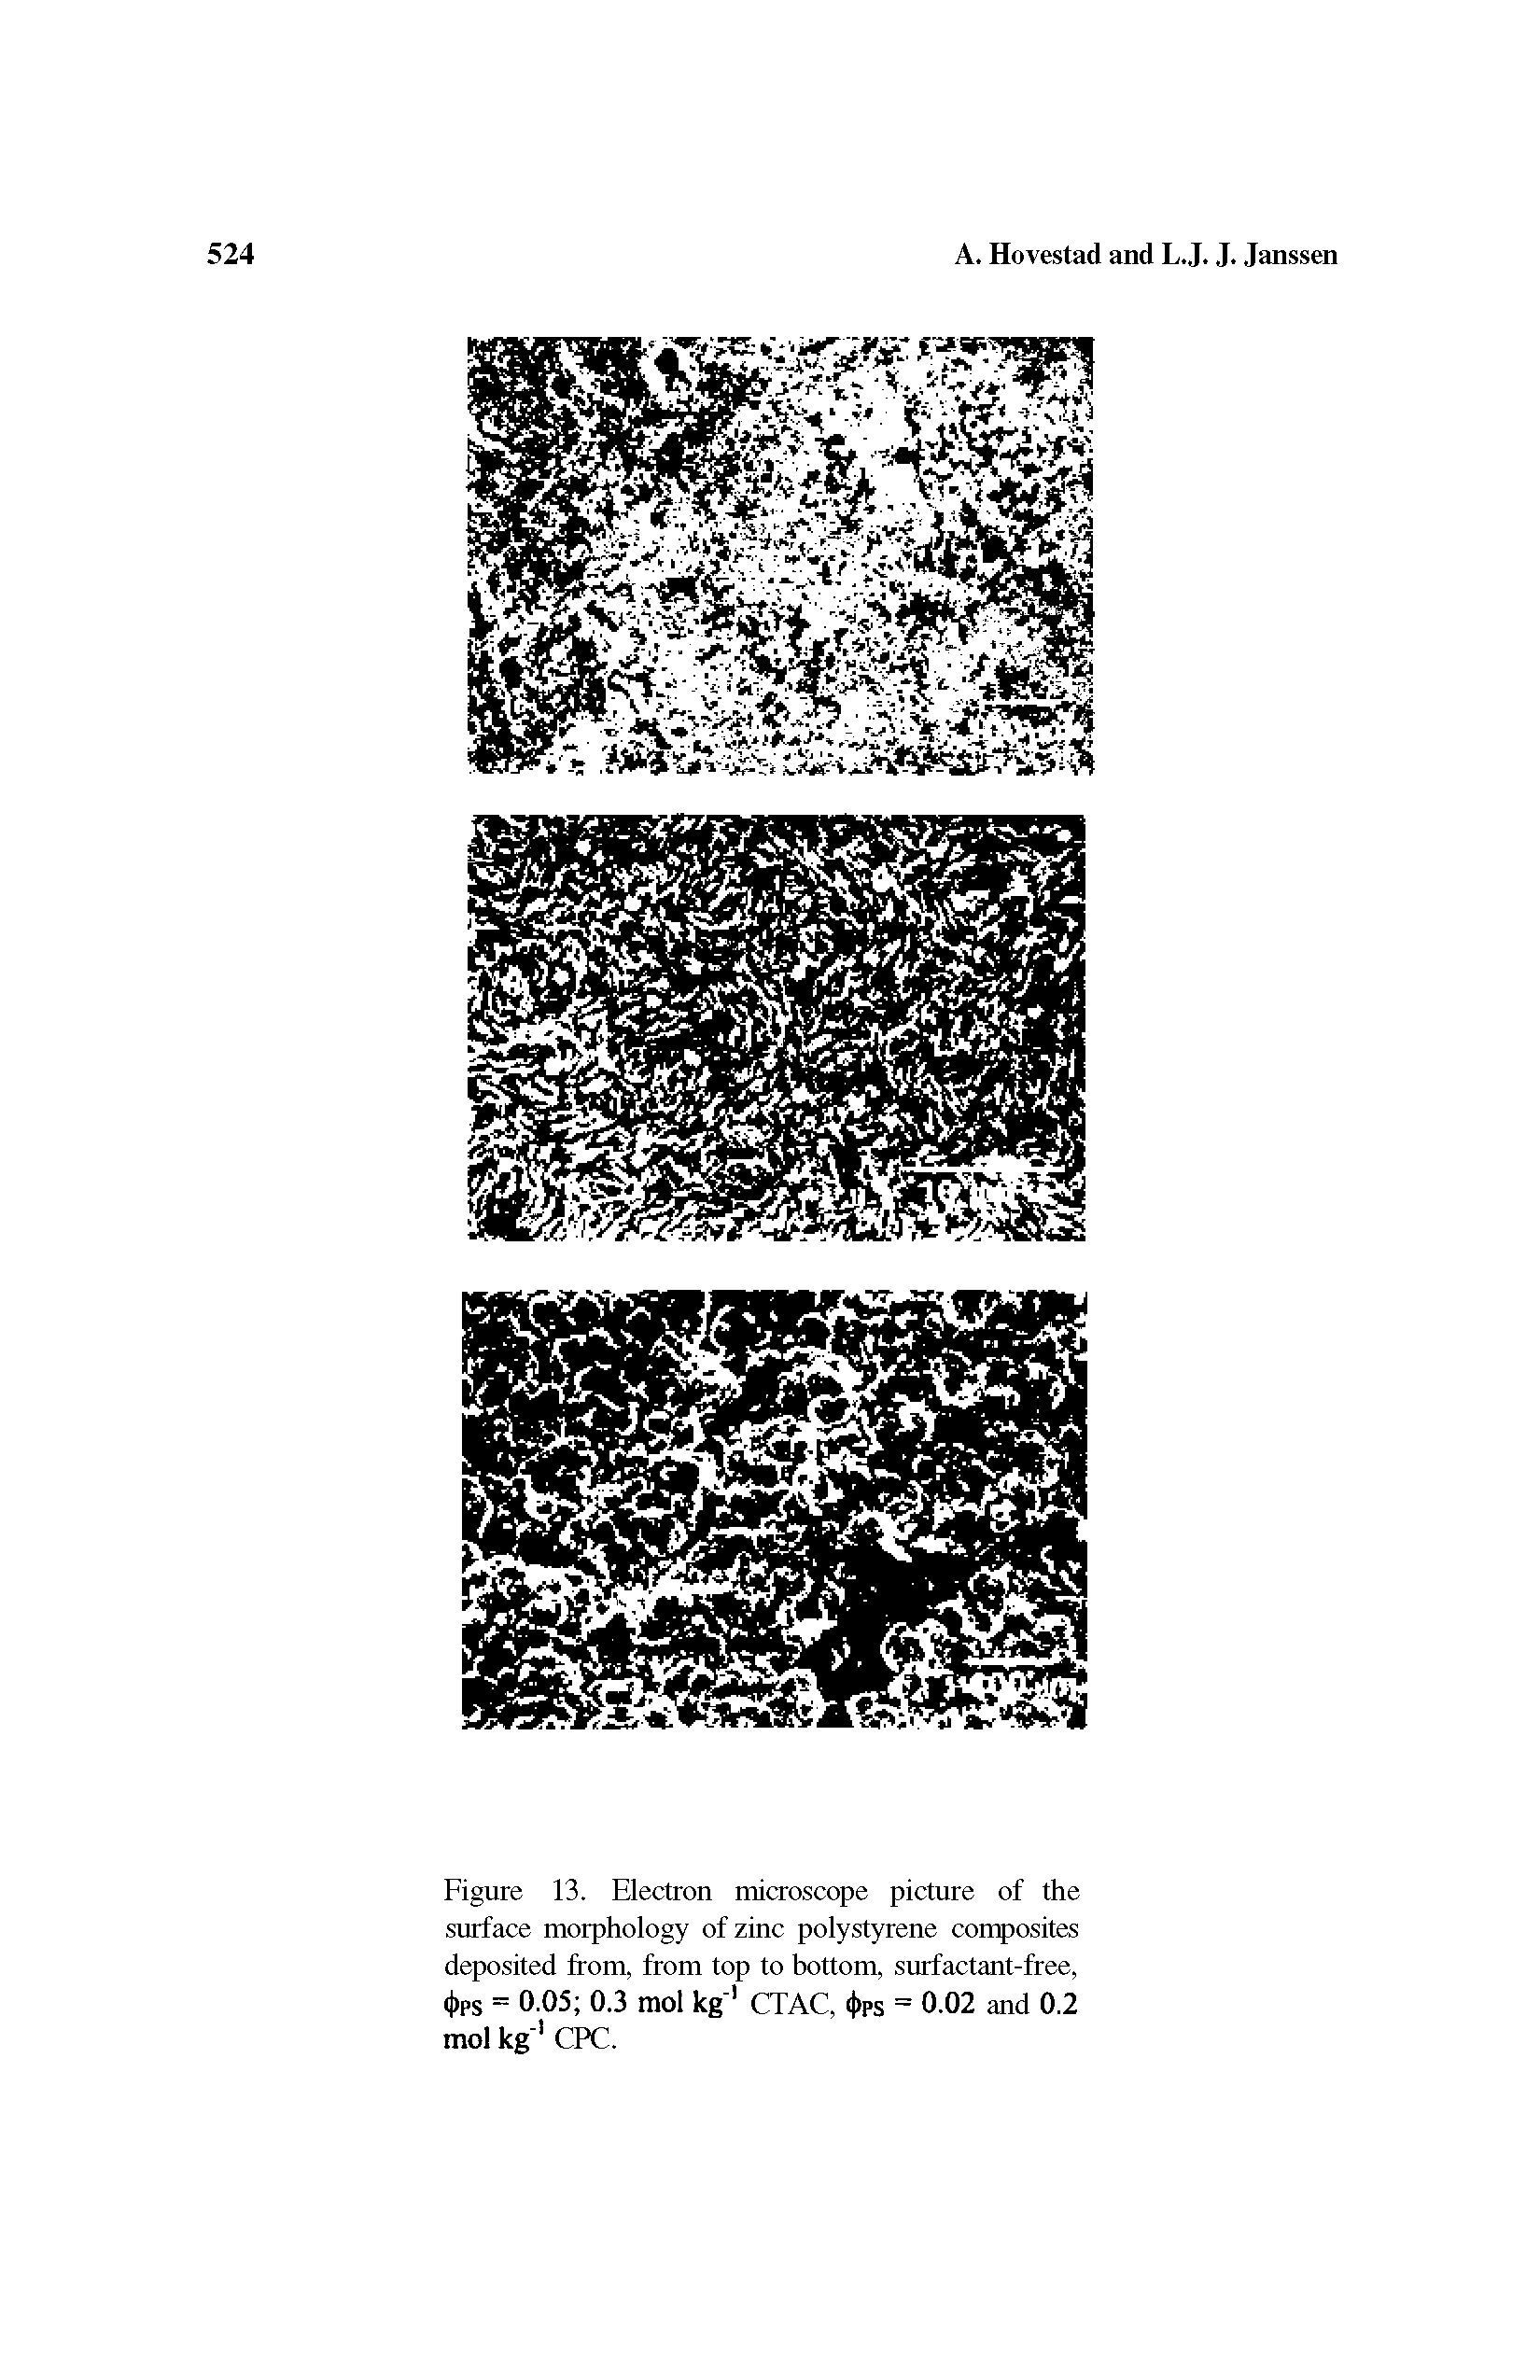 Figure 13. Electron microscope picture of the surface morphology of zinc polystyrene composites deposited from, from top to bottom, surfactant-free, <t>PS = 0.05 0.3 mol kg CTAC, 4>ps = 0.02 and 0.2 mol kg CPC.